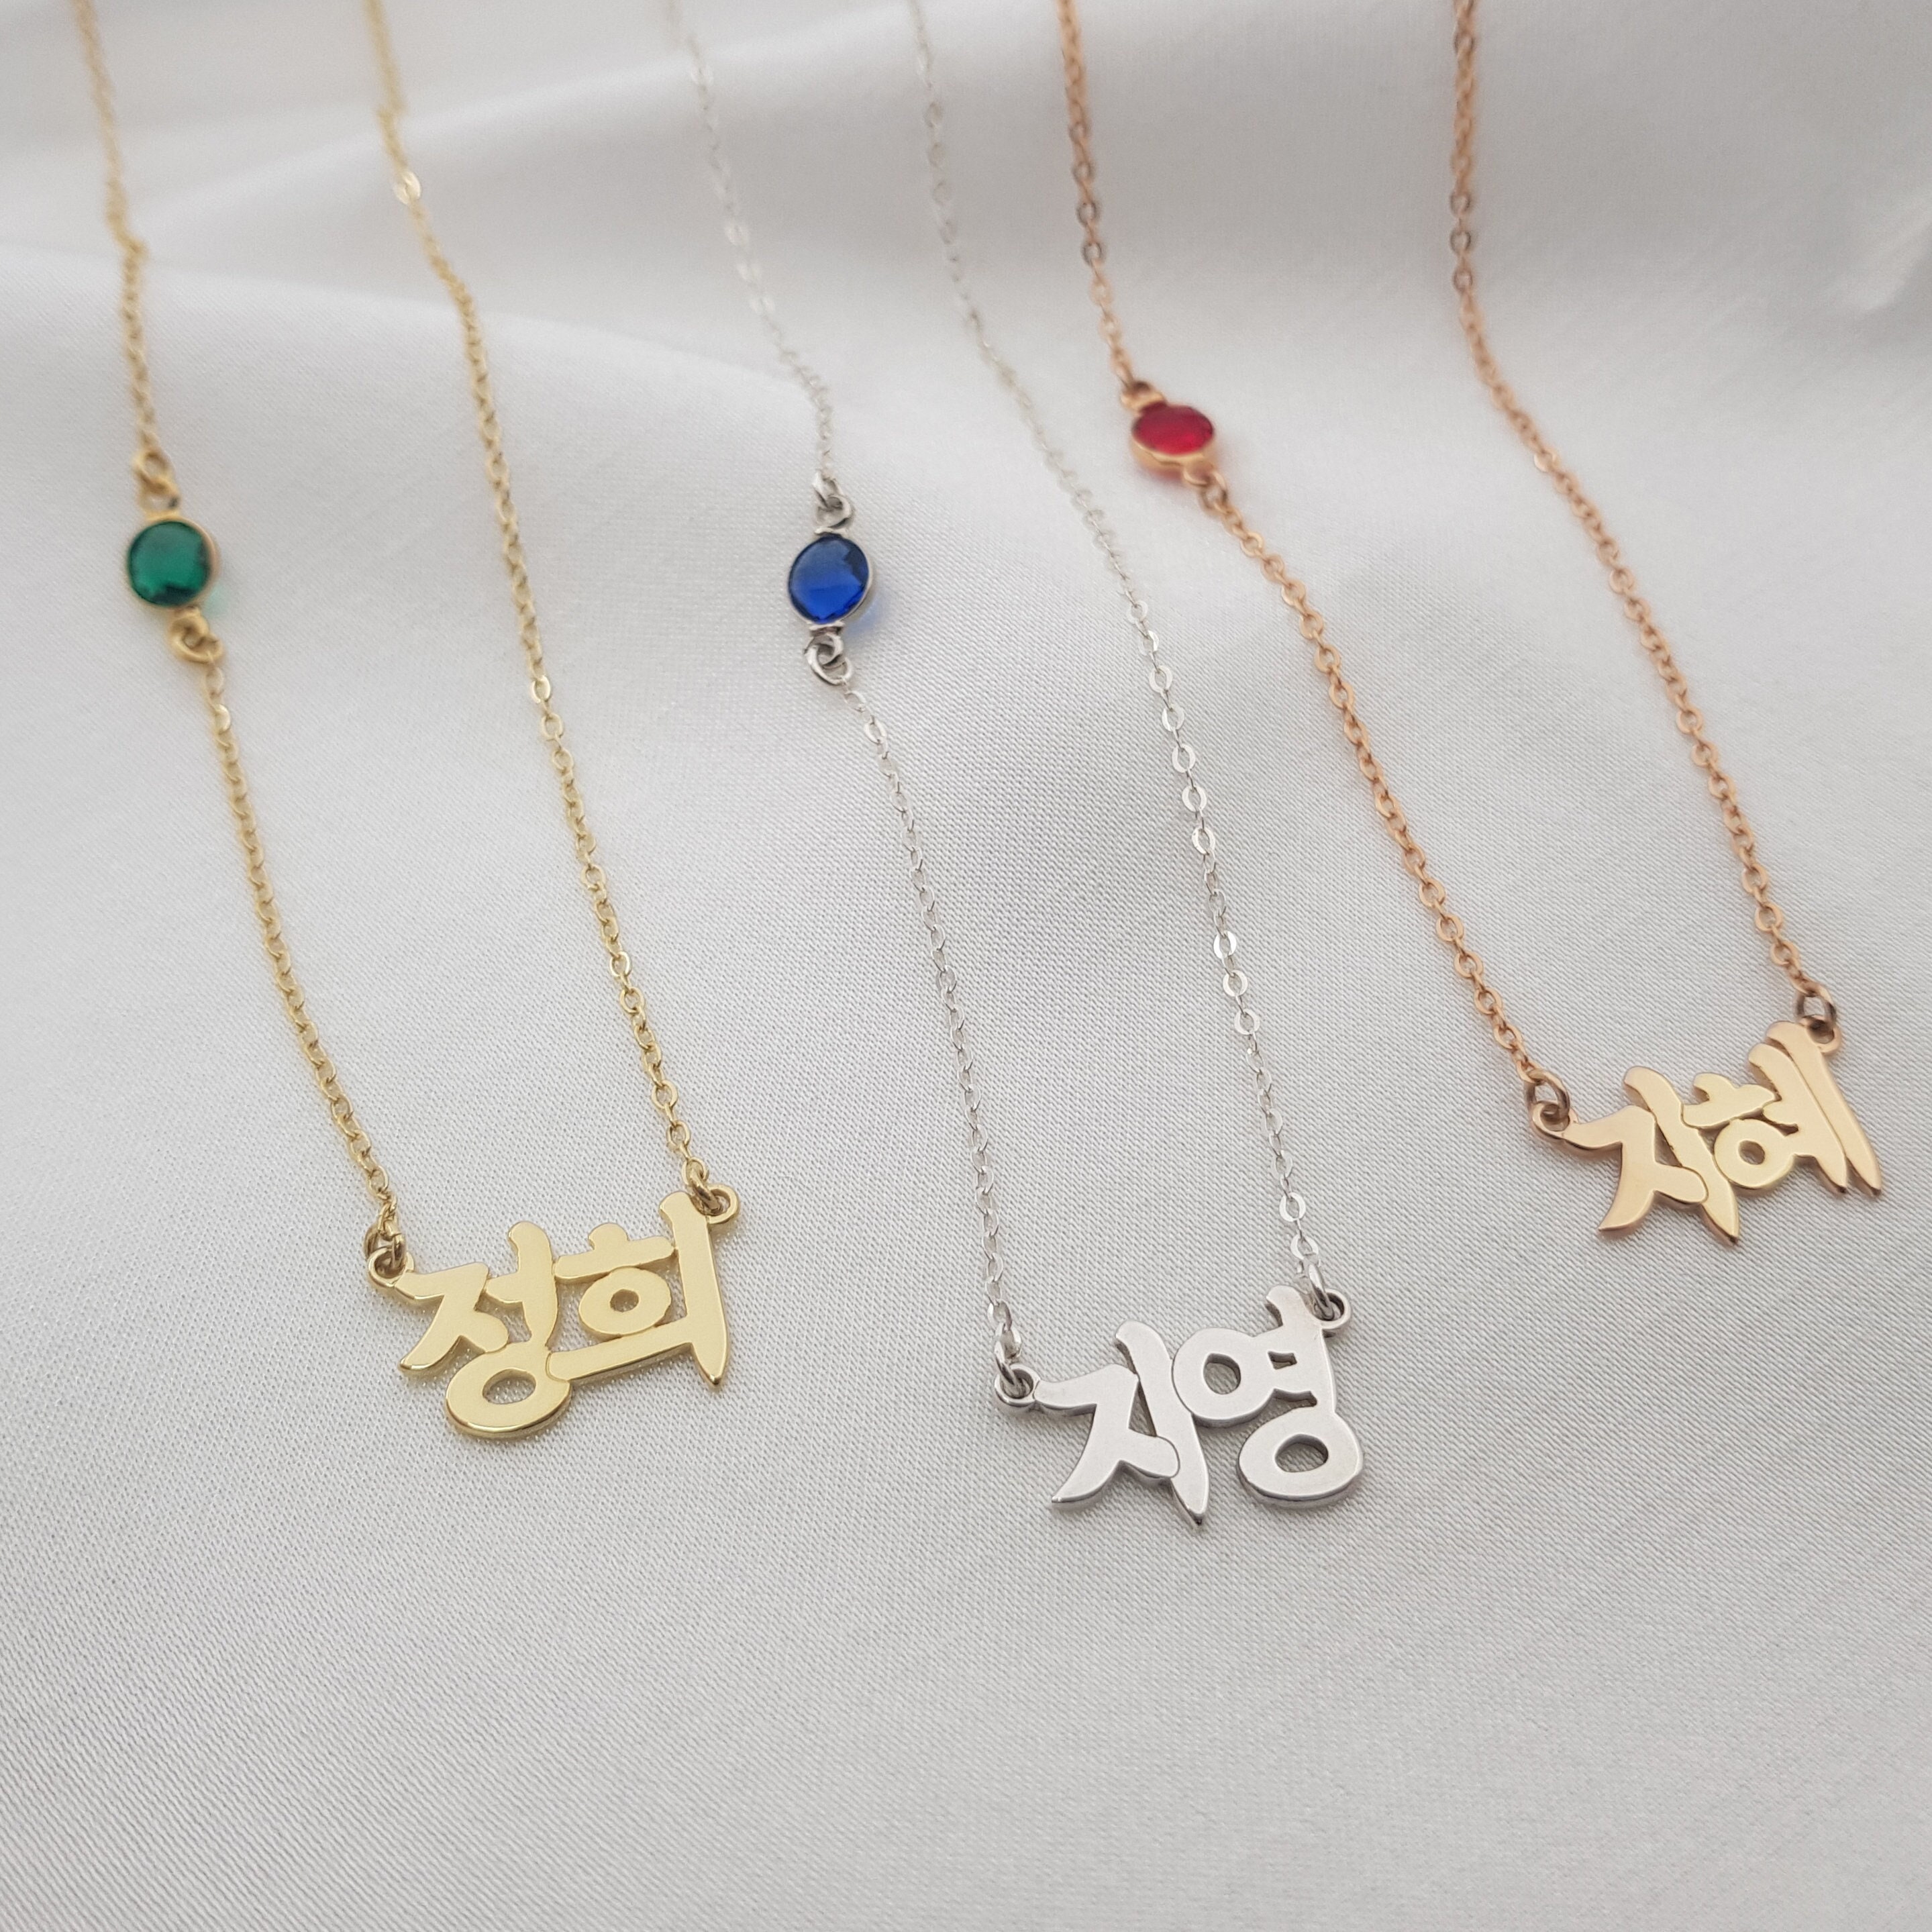 Buy Personalized Engraved Korean Name Round Pendant With Embellishments  Stainless Steel Necklace in 2 Pendant Sizes Korea Jewelry Hangul Online in  India - Etsy